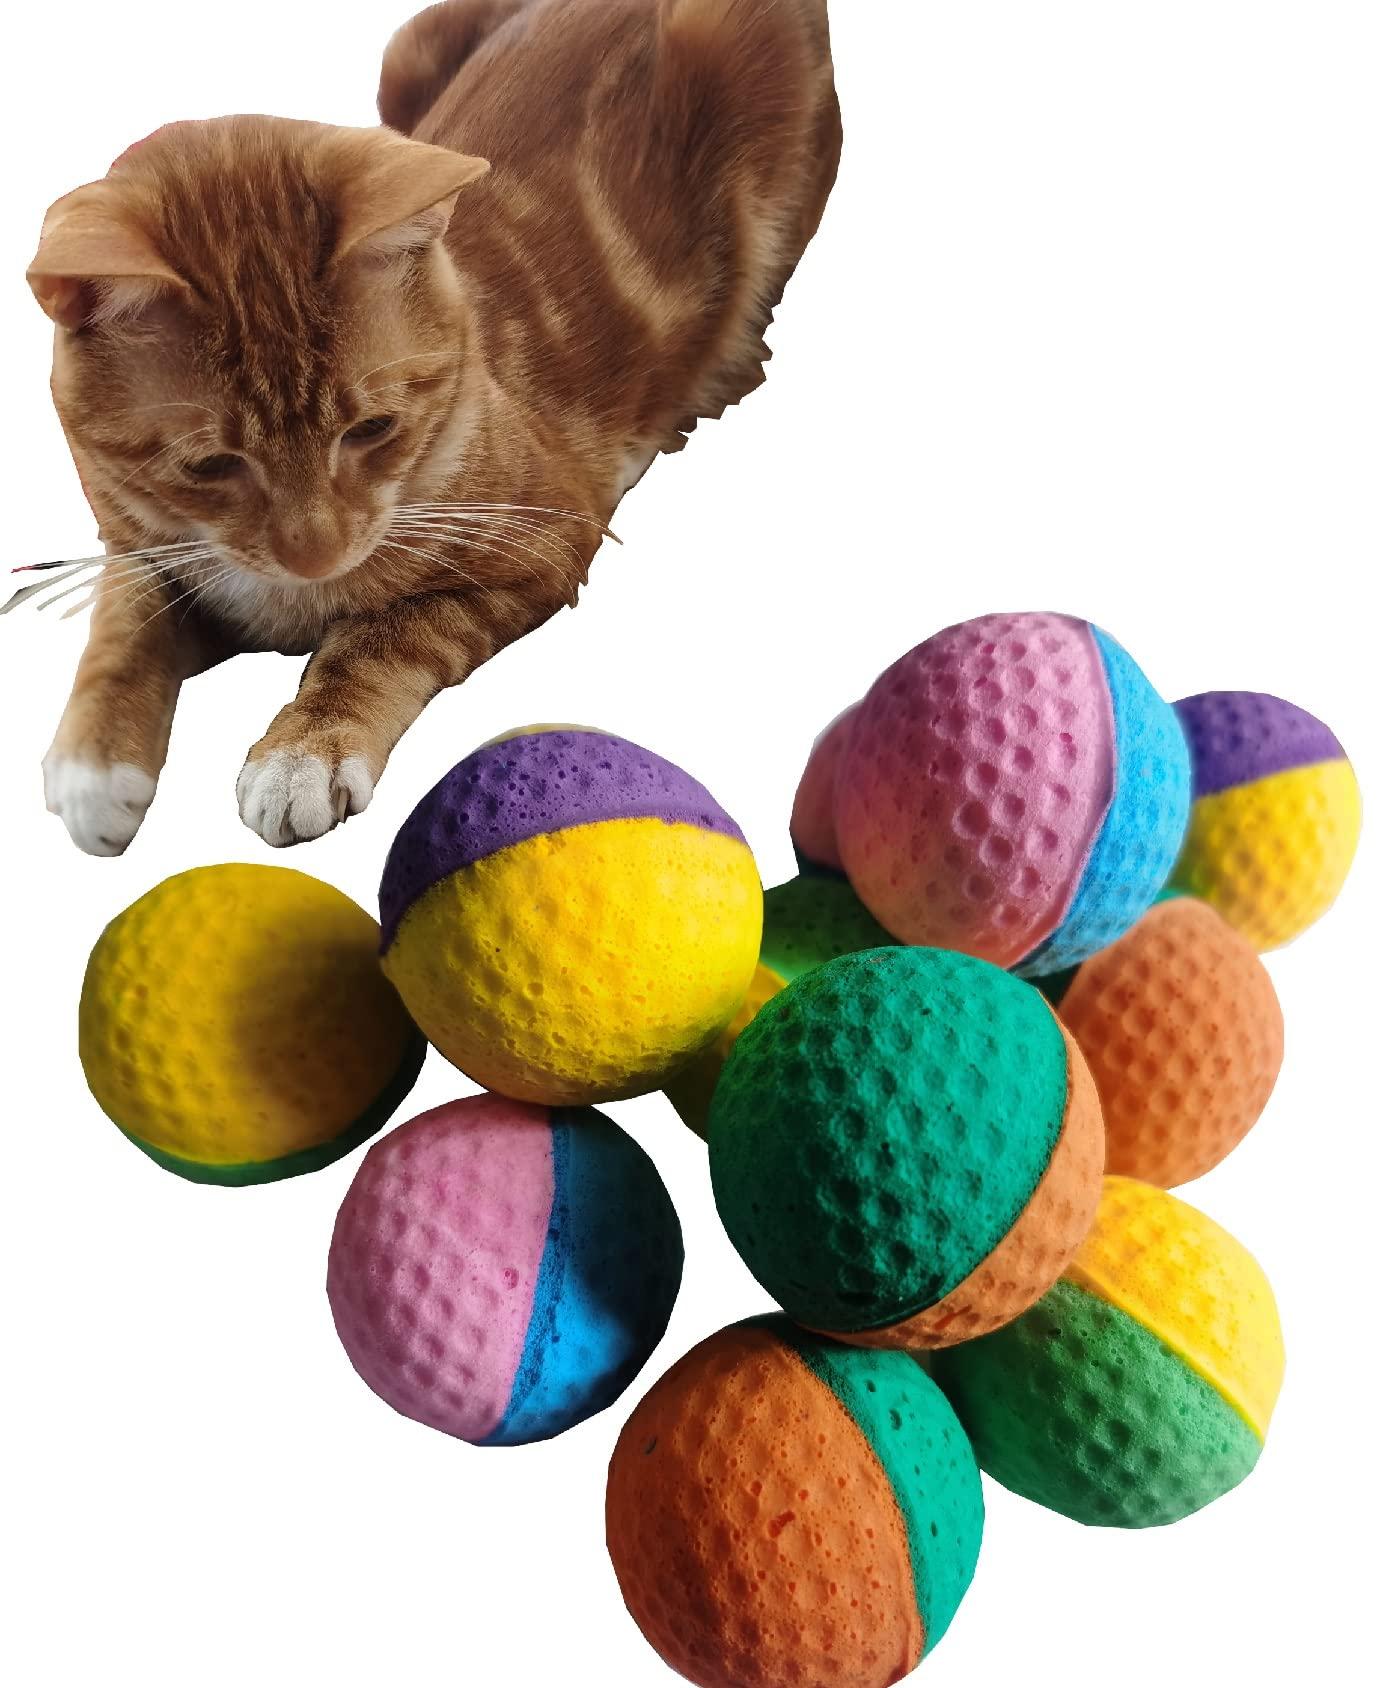 GINFH Cat Foam Ball Cat Sponge Ball Toy Cat Soccer Ball Toy (Two Color pet Ball)